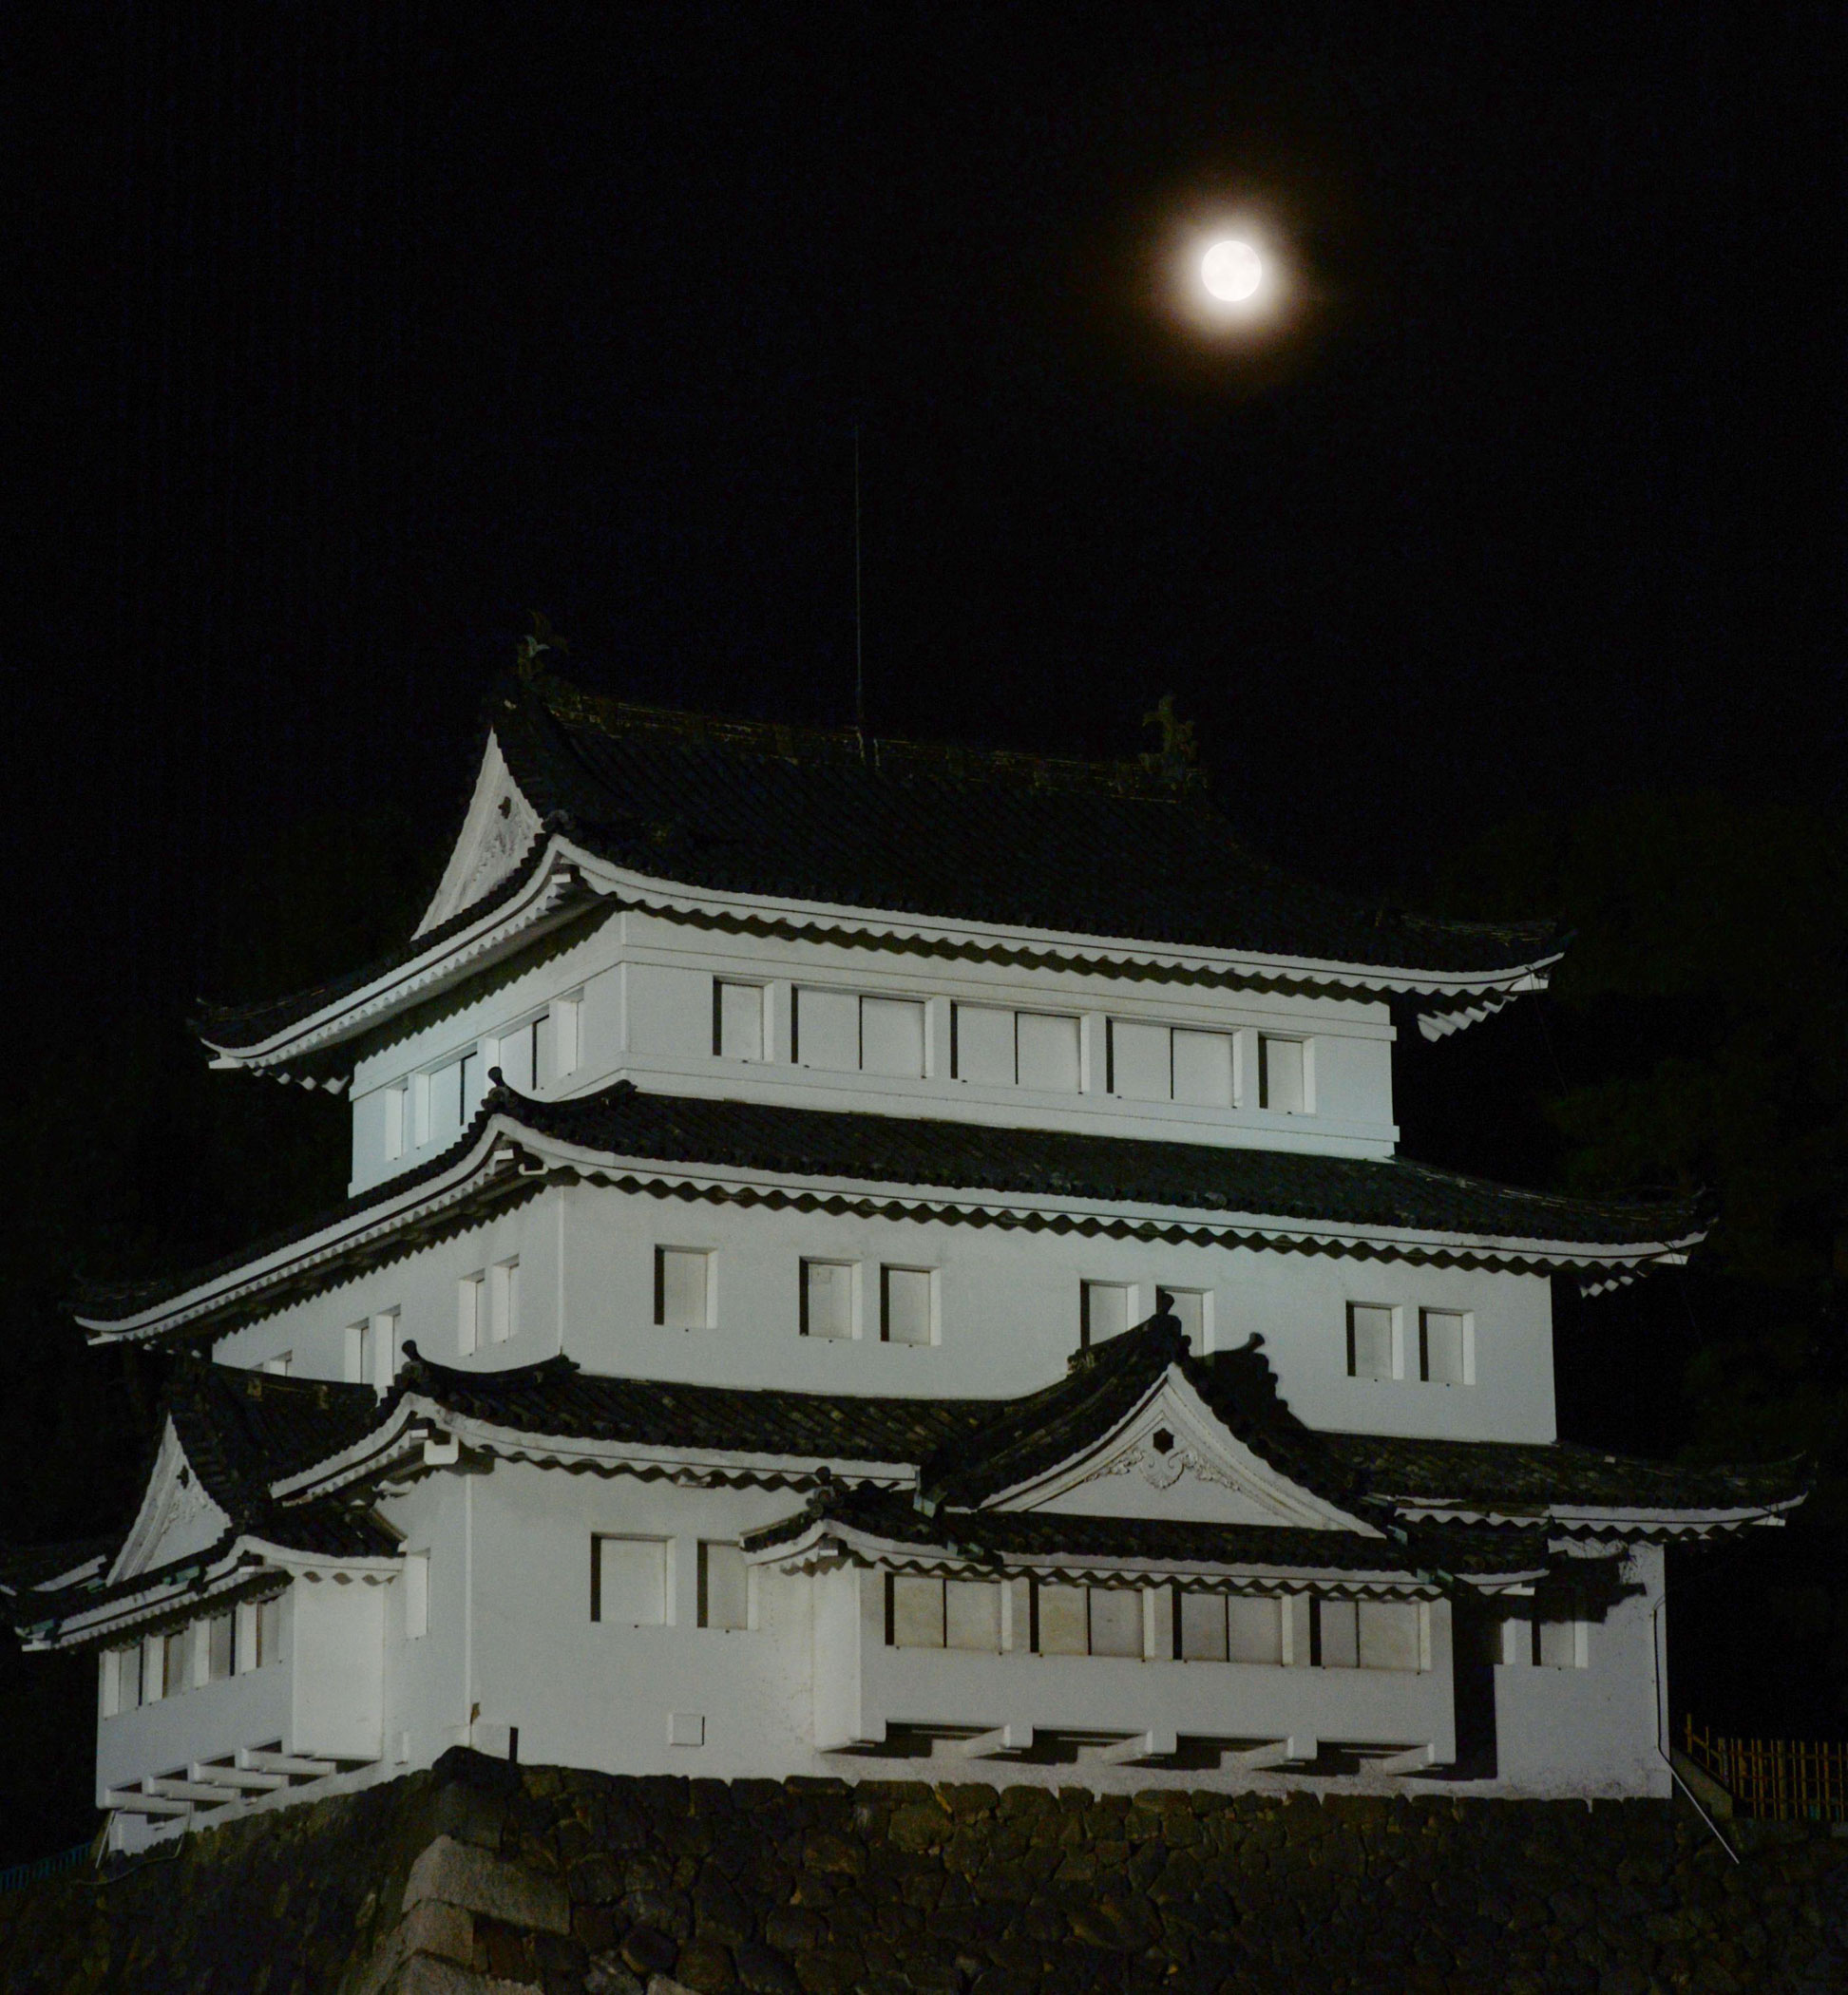 The harvest supermoon is seen over the Northwest Turret of Nagoya Castle in the city of Nagoya, Japan, on Sept. 8, 2014.